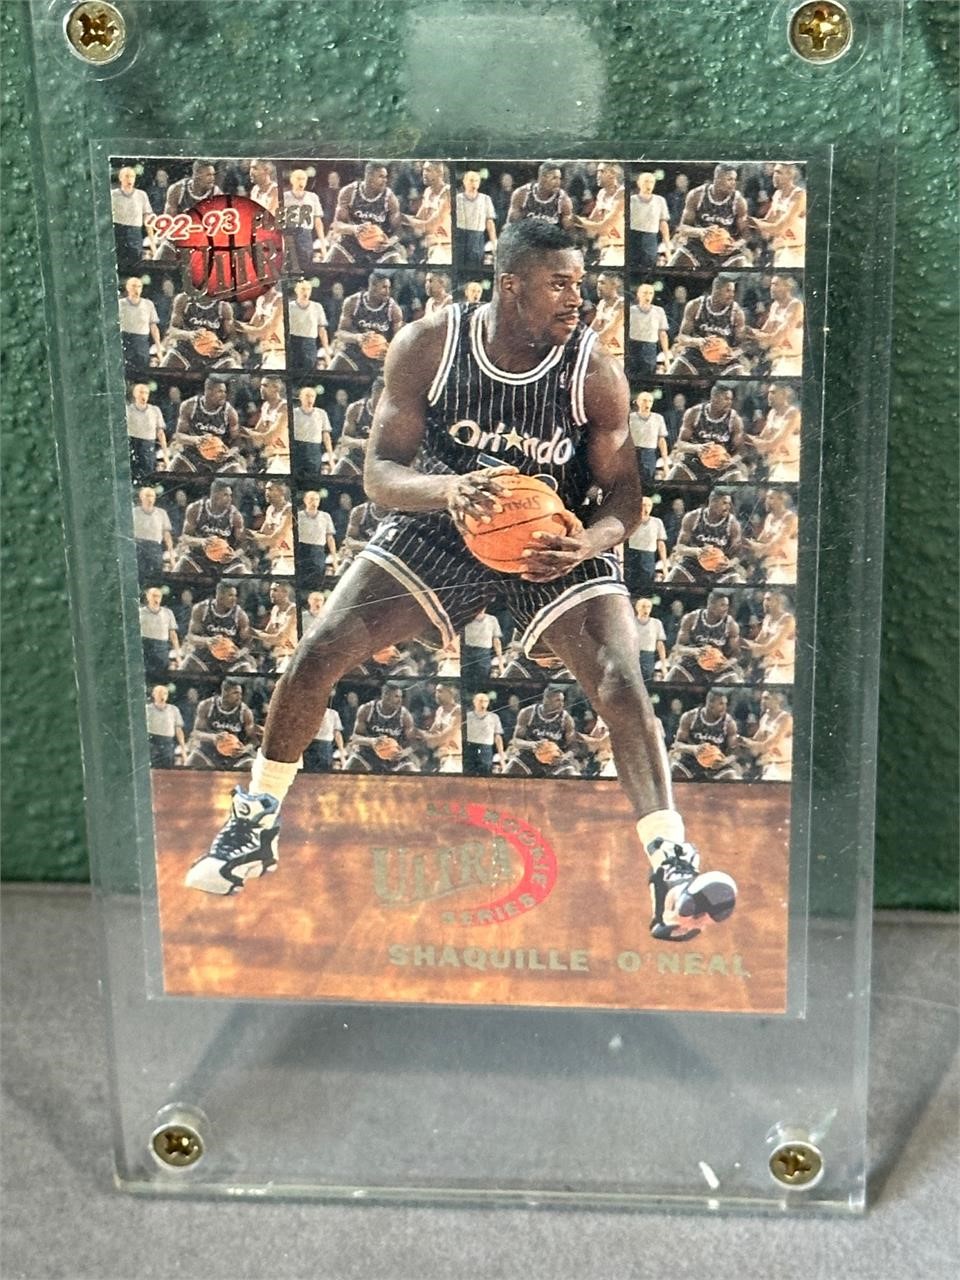 Shaquille O'Neal BasketBall Card